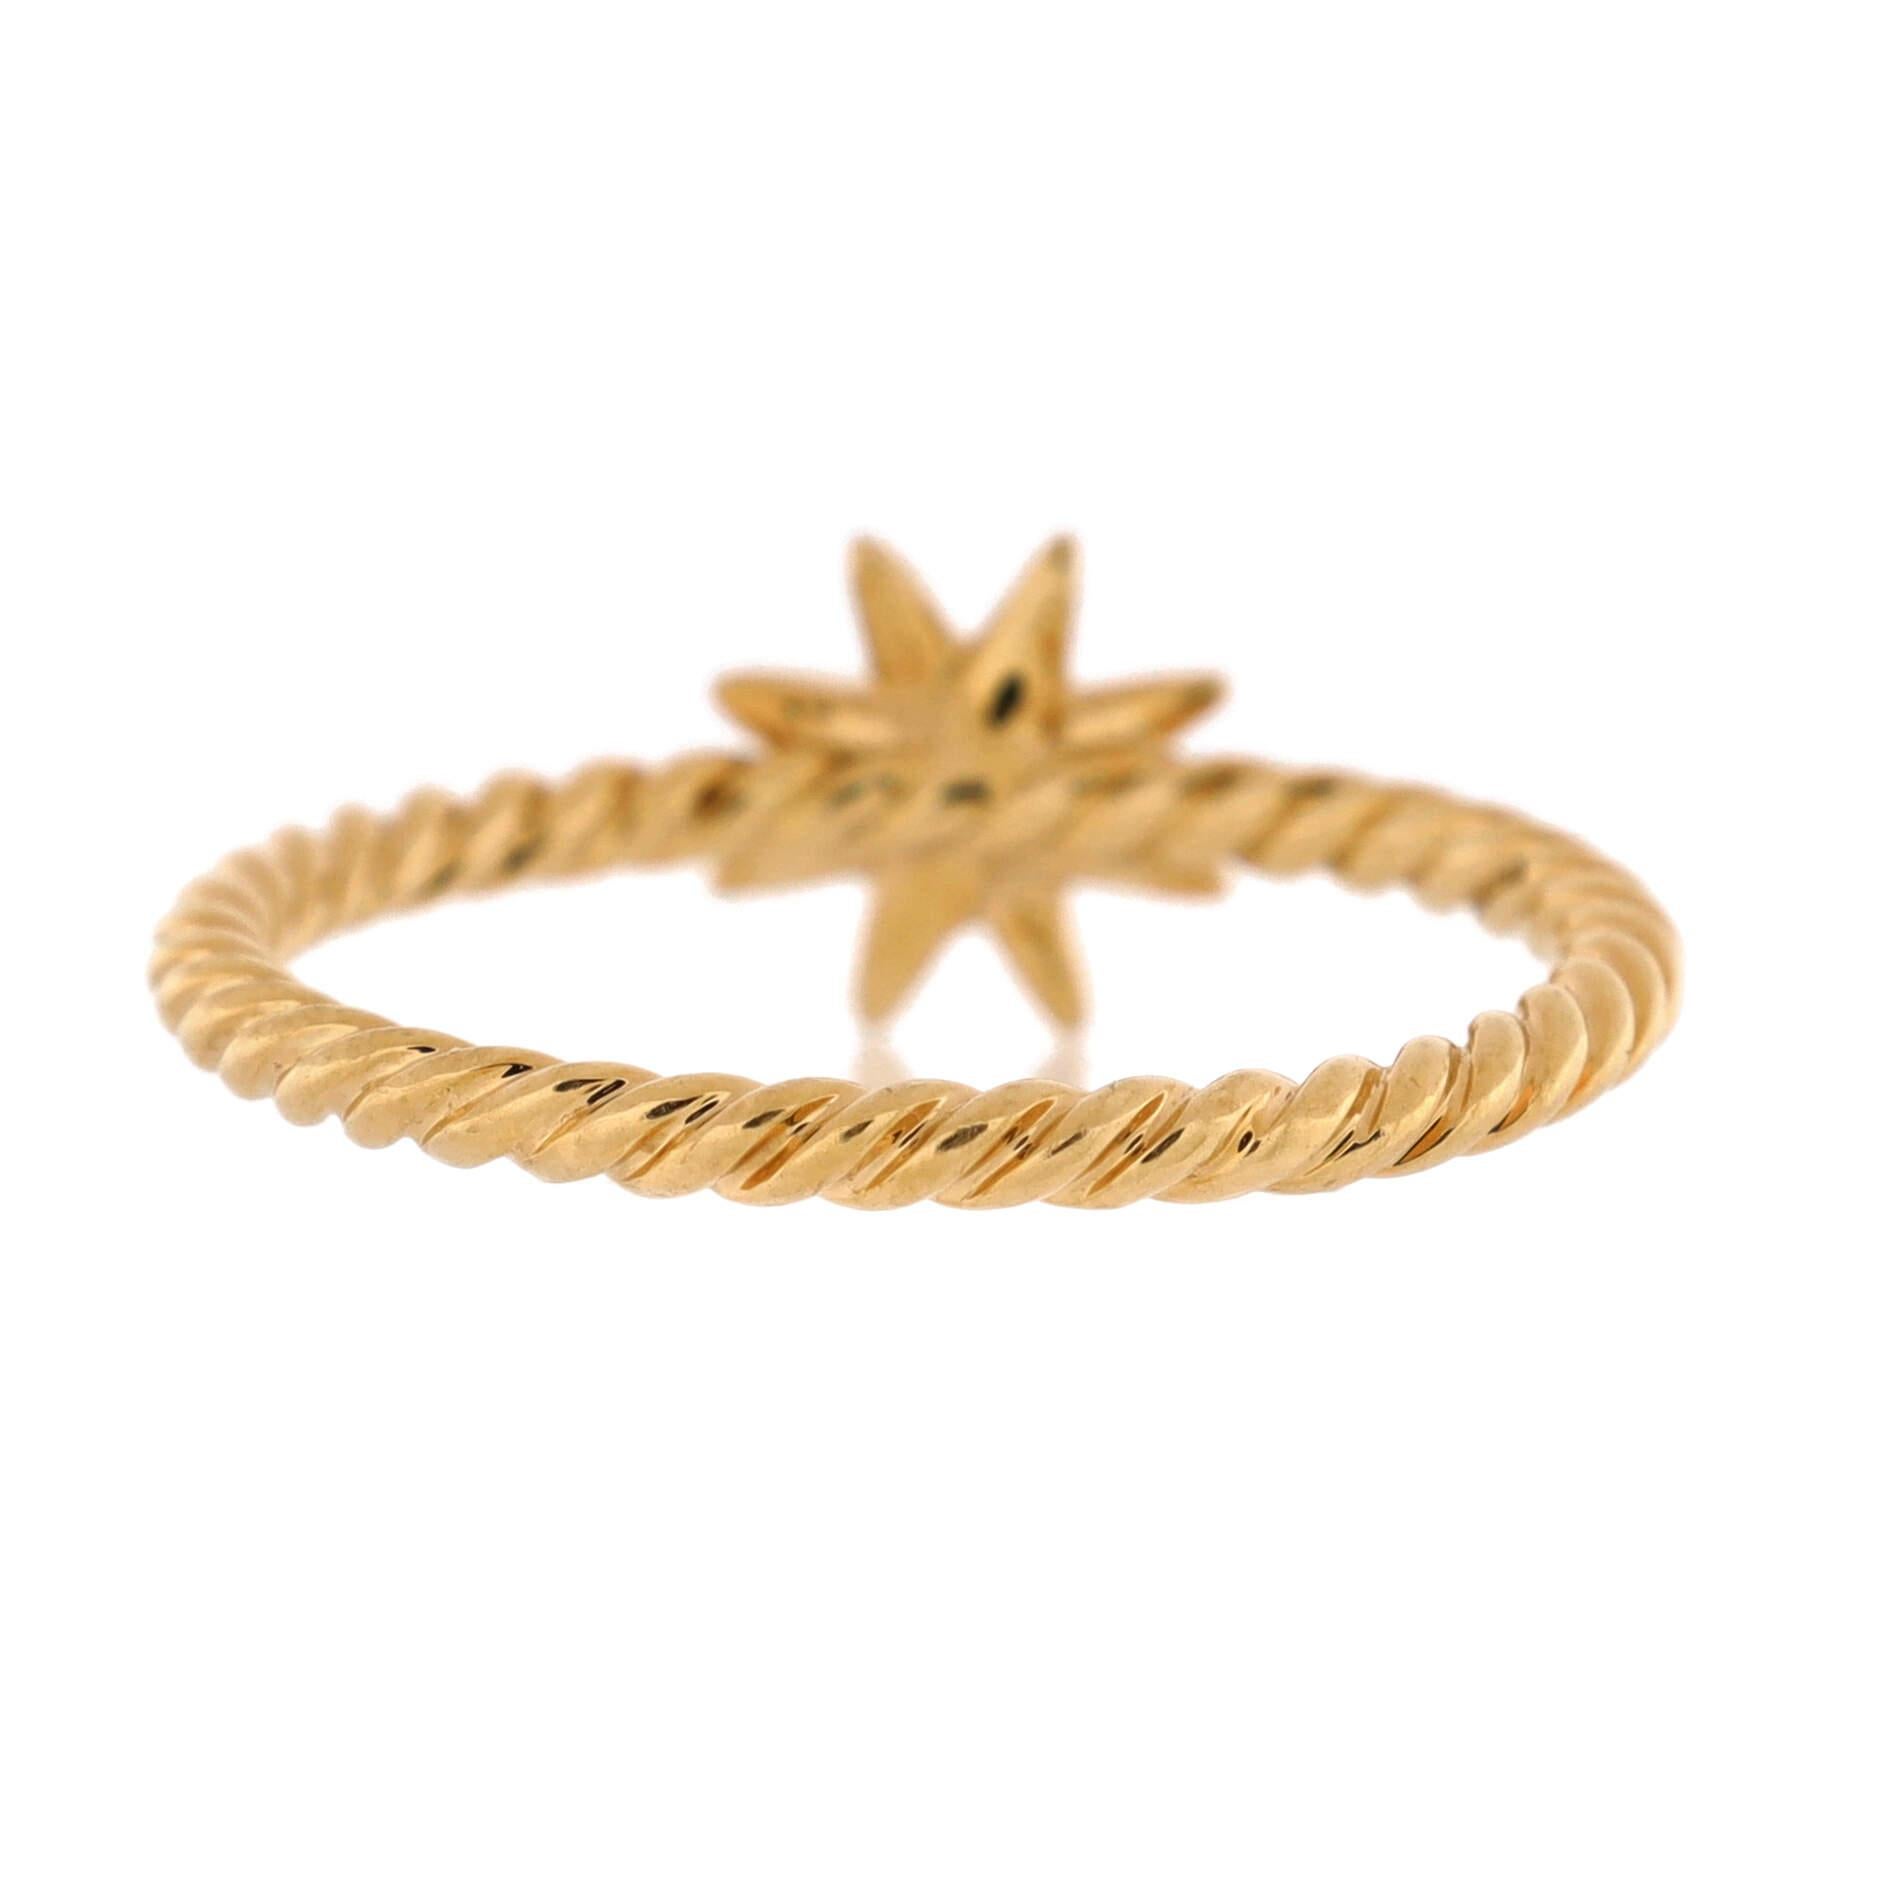 Condition: Excellent. Faint wear throughout.
Accessories: No Accessories
Measurements: Size: 6.5, Width: 1.75 mm
Designer: David Yurman
Model: Starburst Cable Ring 18K Yellow Gold with Diamonds Petite
Exterior Color: Yellow Gold
Item Number: 209421/1